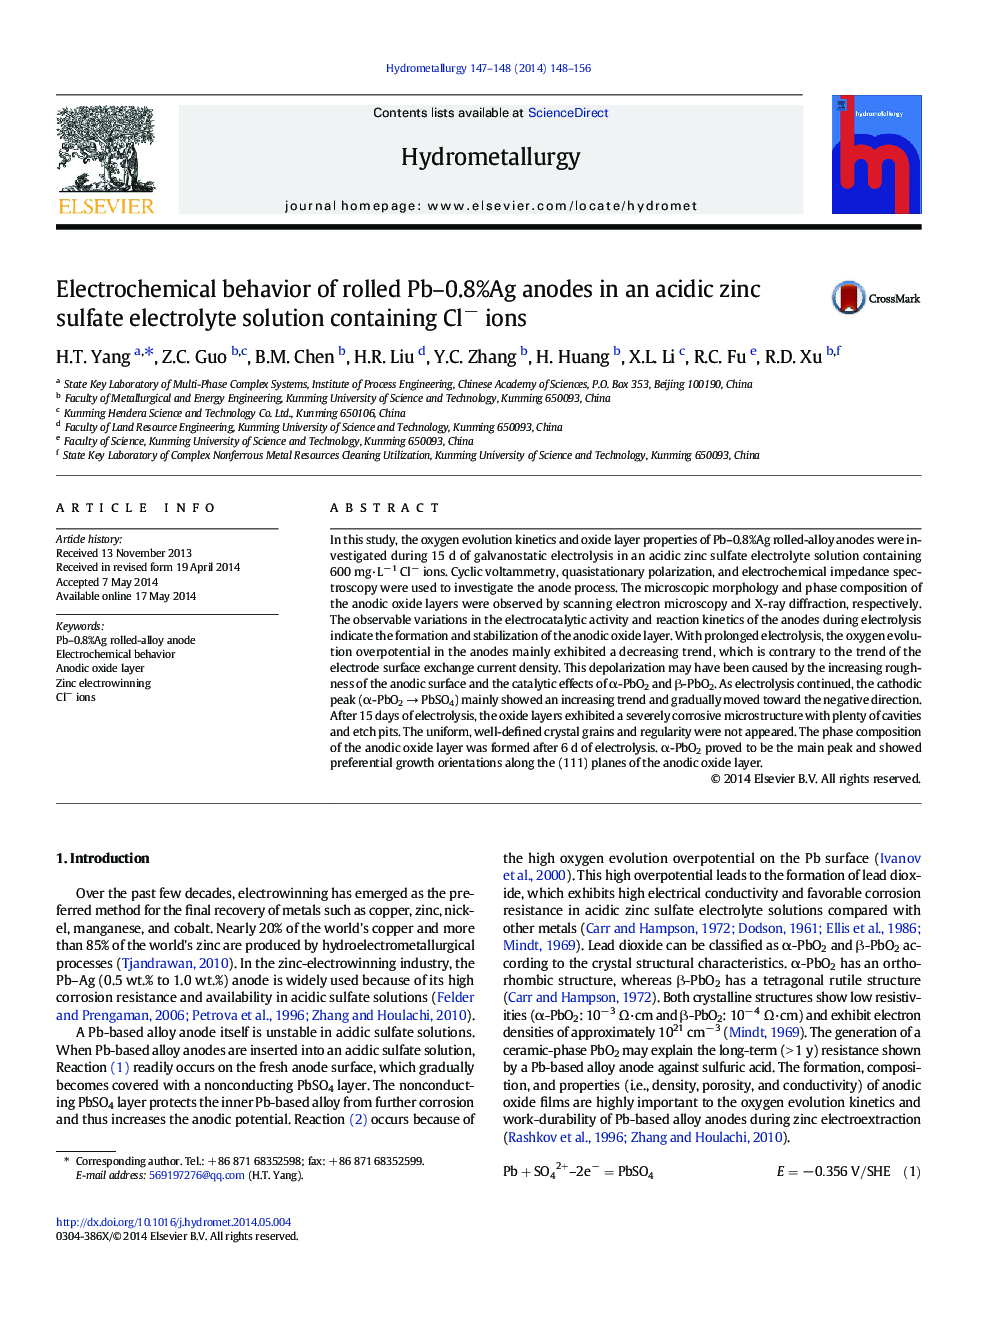 Electrochemical behavior of rolled Pb–0.8%Ag anodes in an acidic zinc sulfate electrolyte solution containing Cl− ions